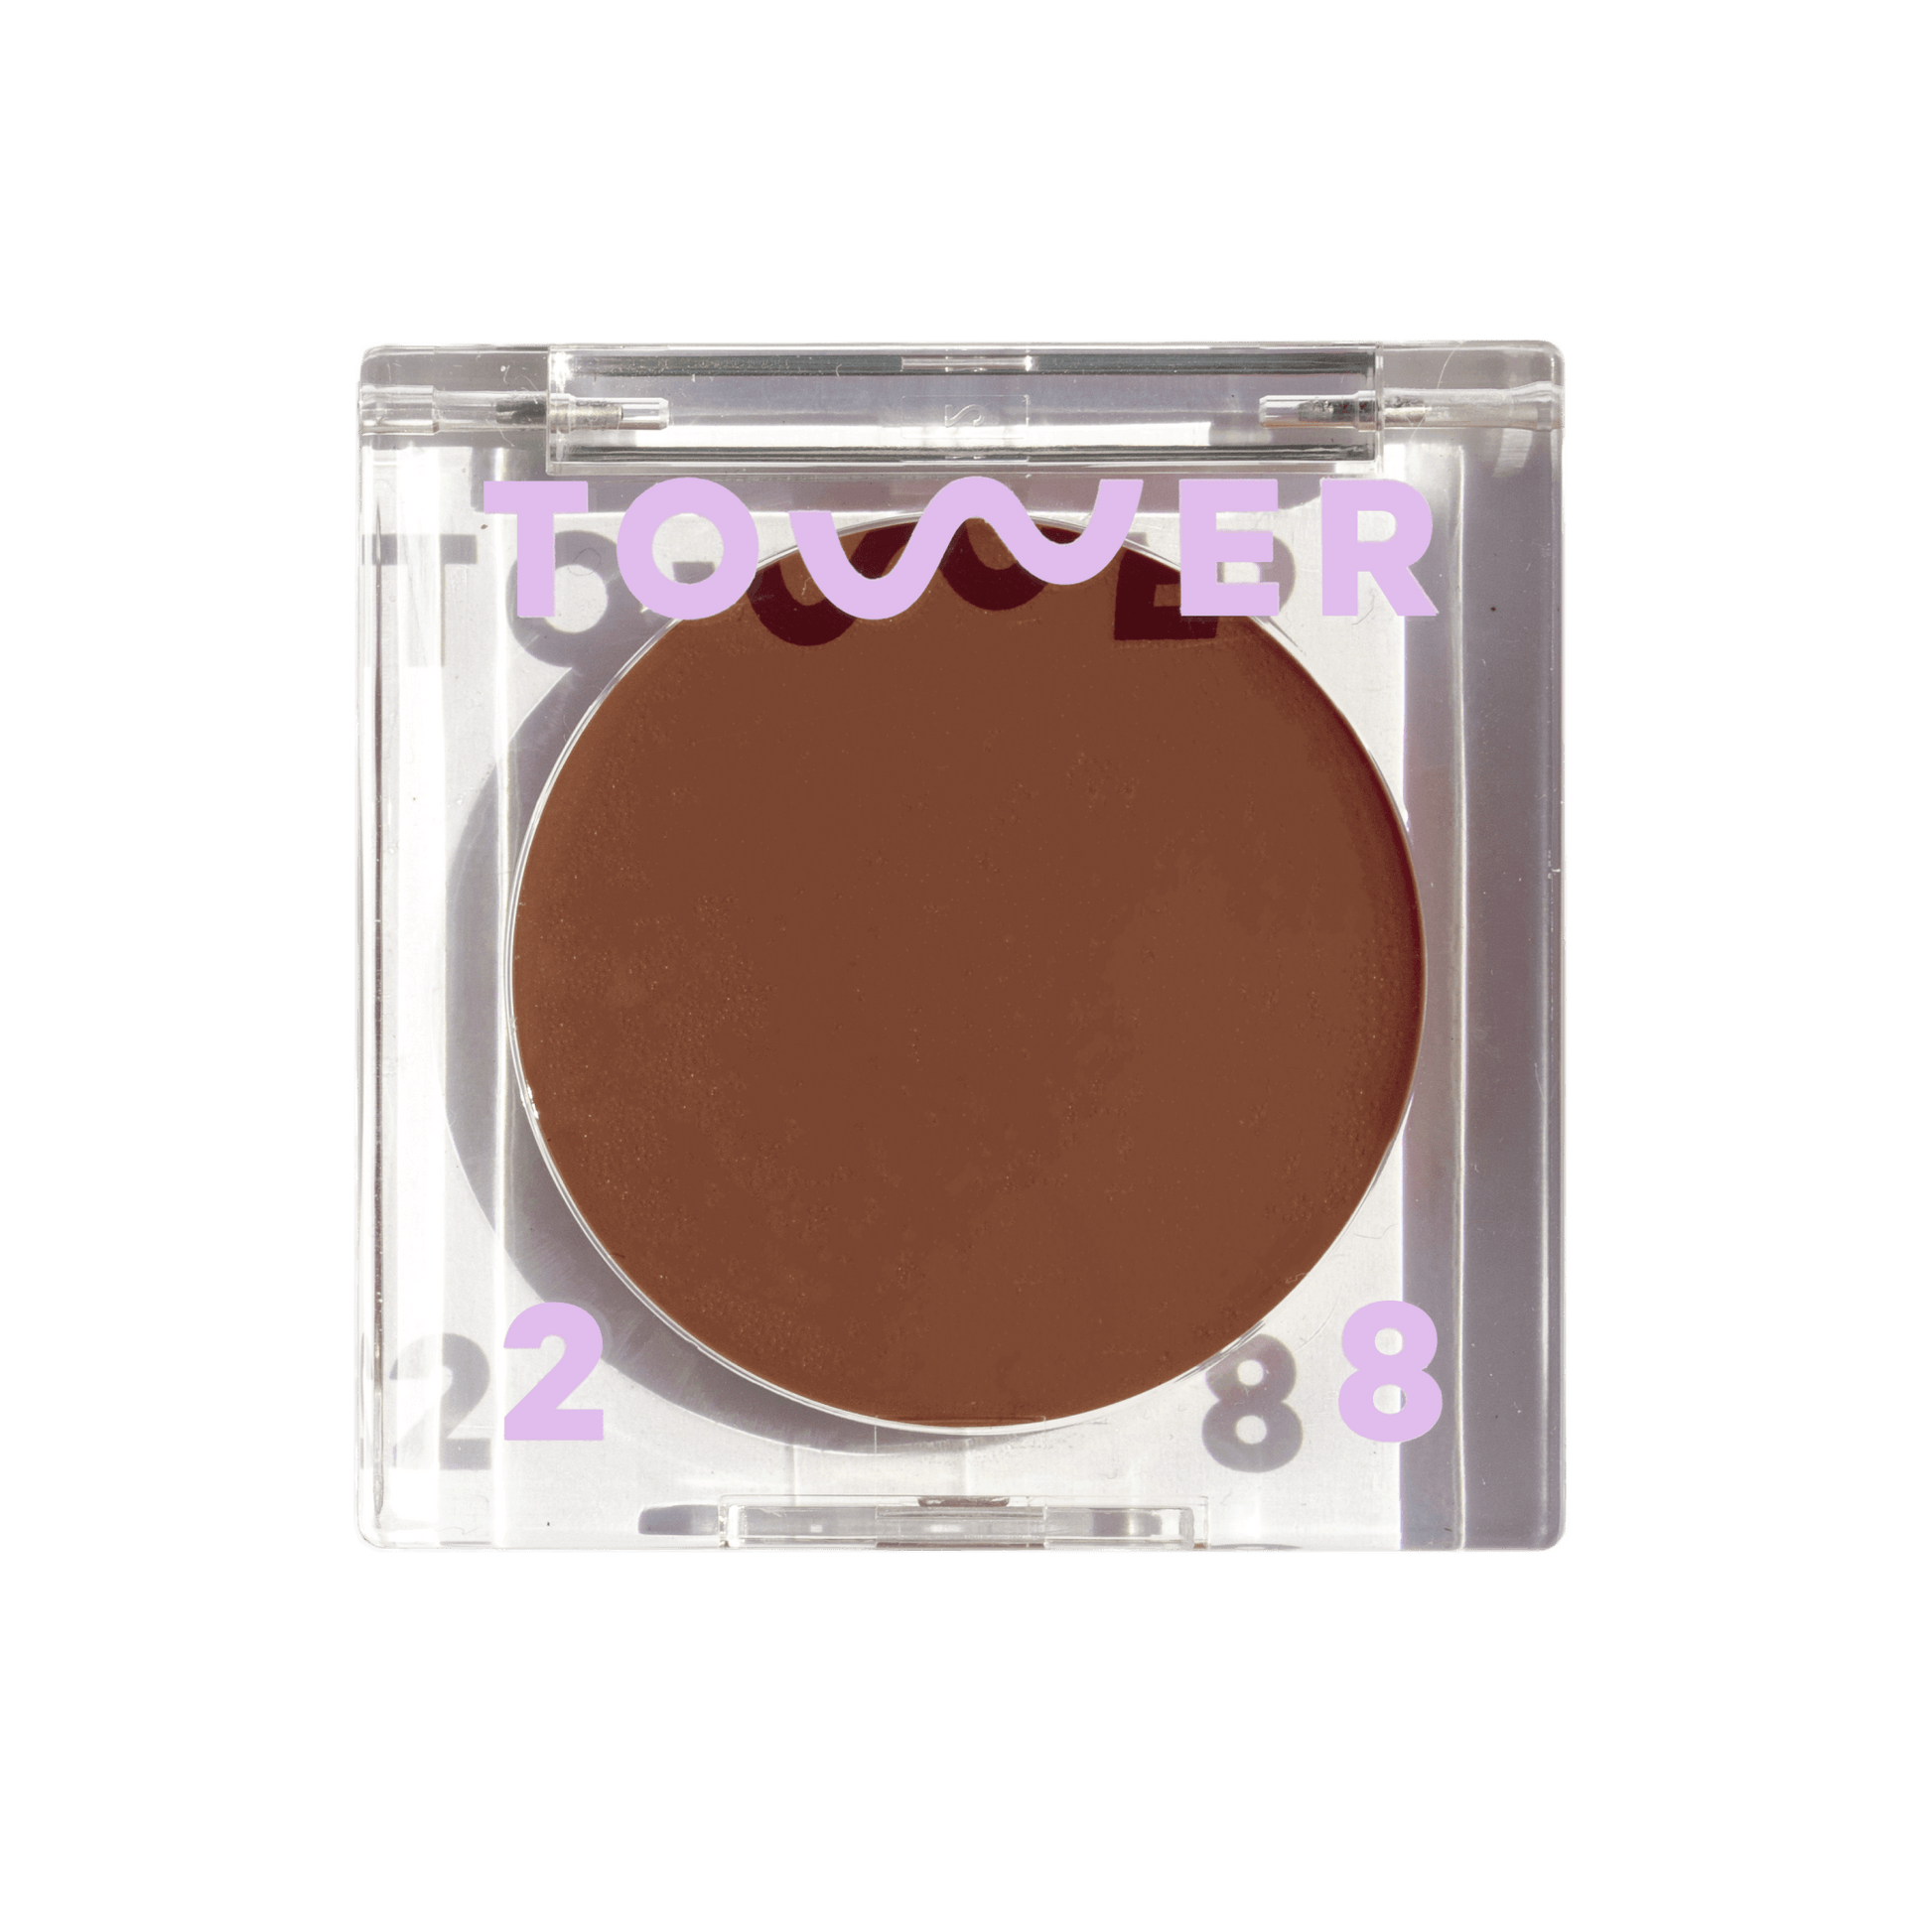 The Tower 28 Beauty Sculptino™ Cream Contour in the shade Hammer